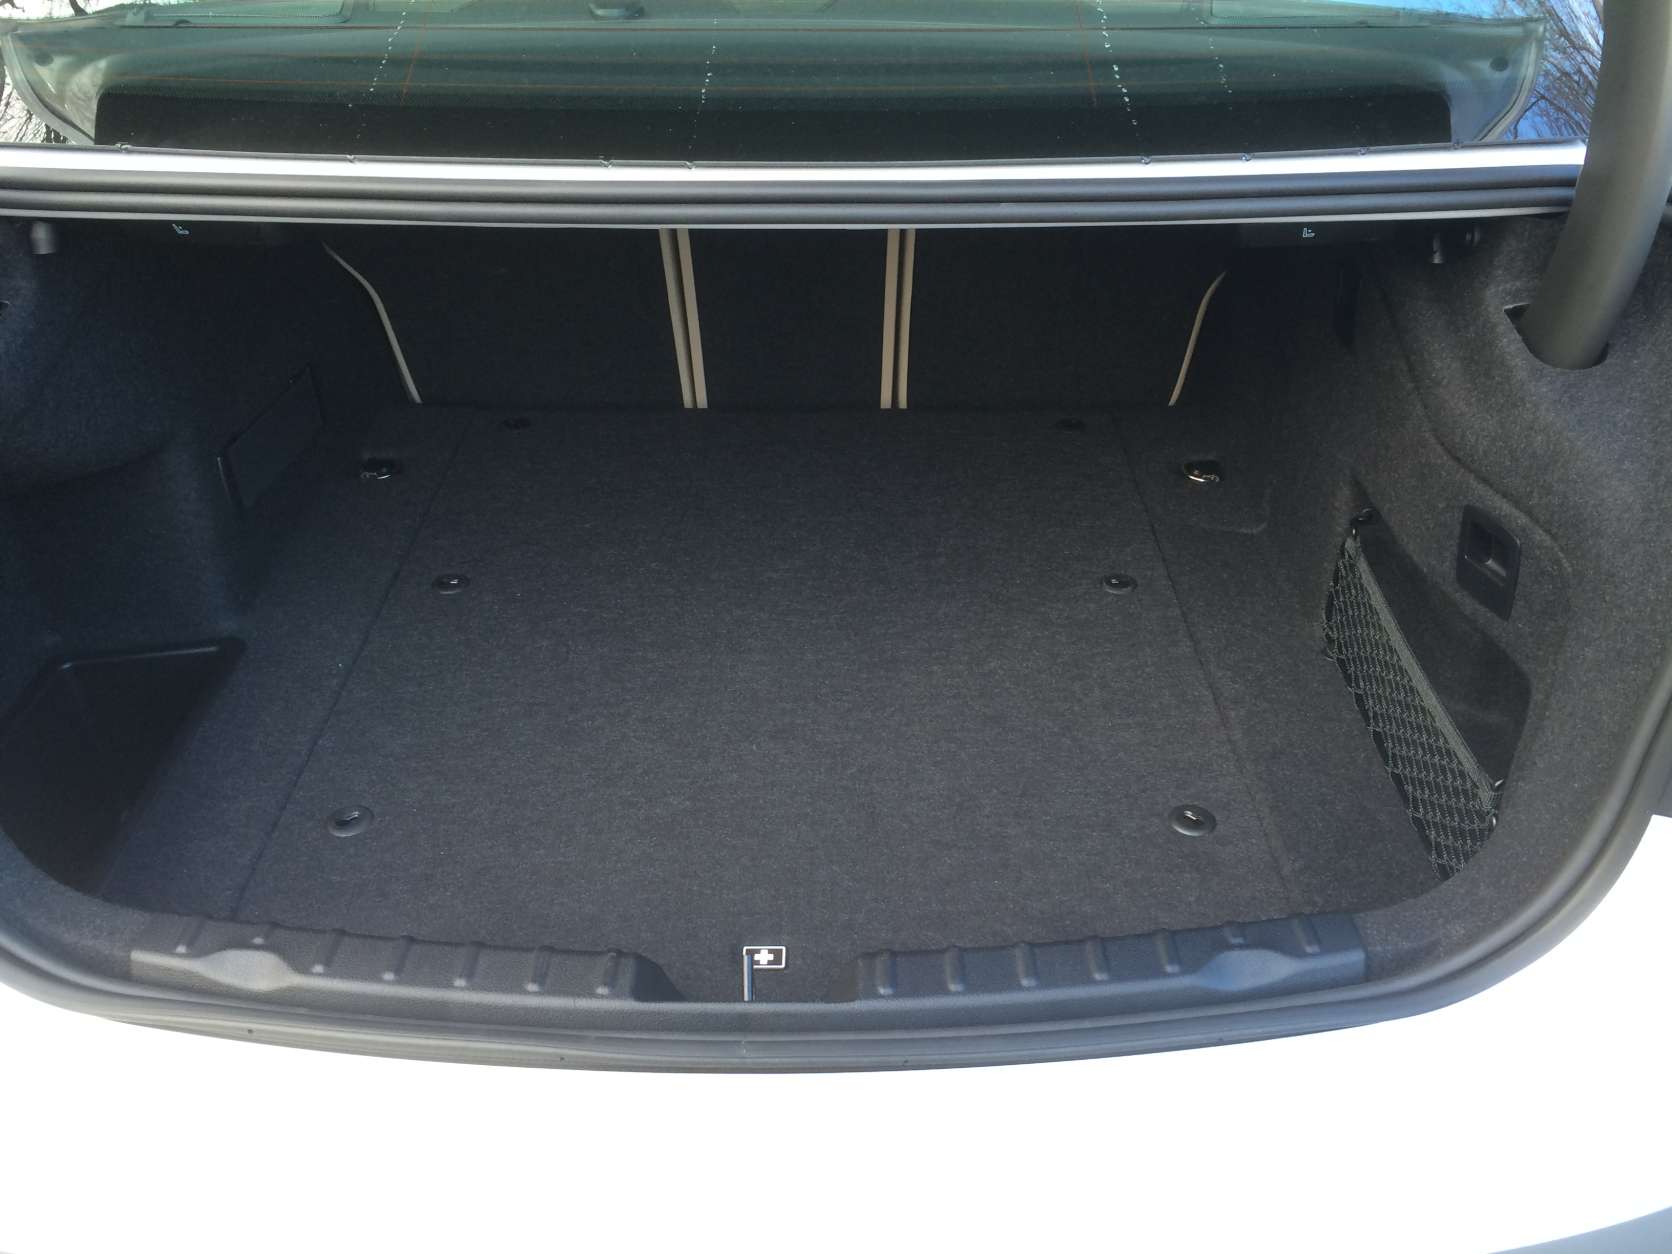 The trunk floor is a bit high, but it’s still a very usable space. (WTOP/Mike Parris)